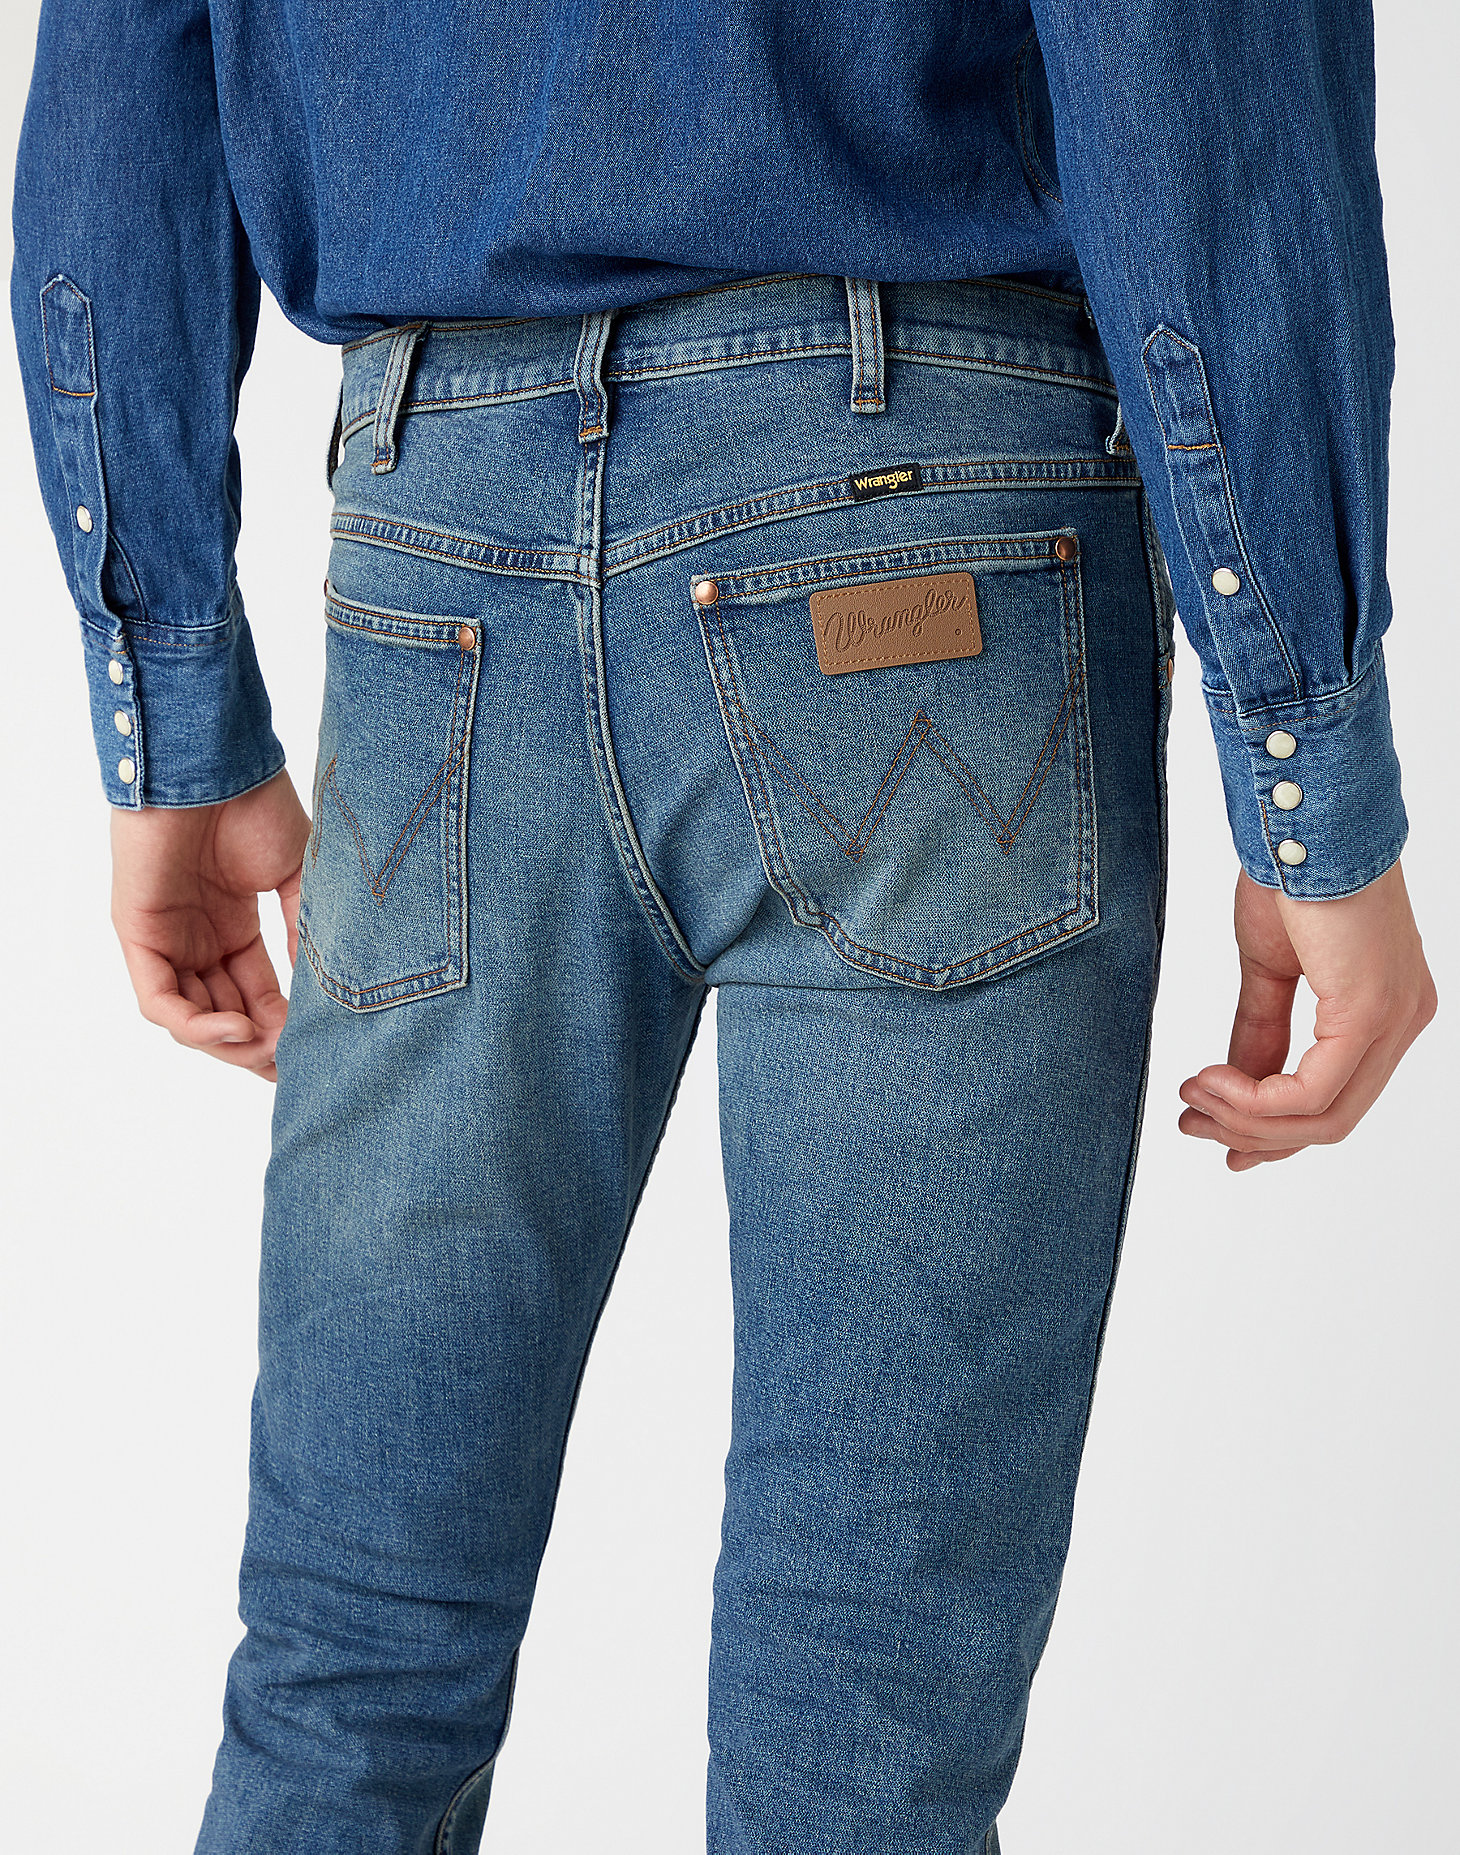 Indigood Icons 11MWZ Western Slim Jeans in Dust Bowl alternative view 3